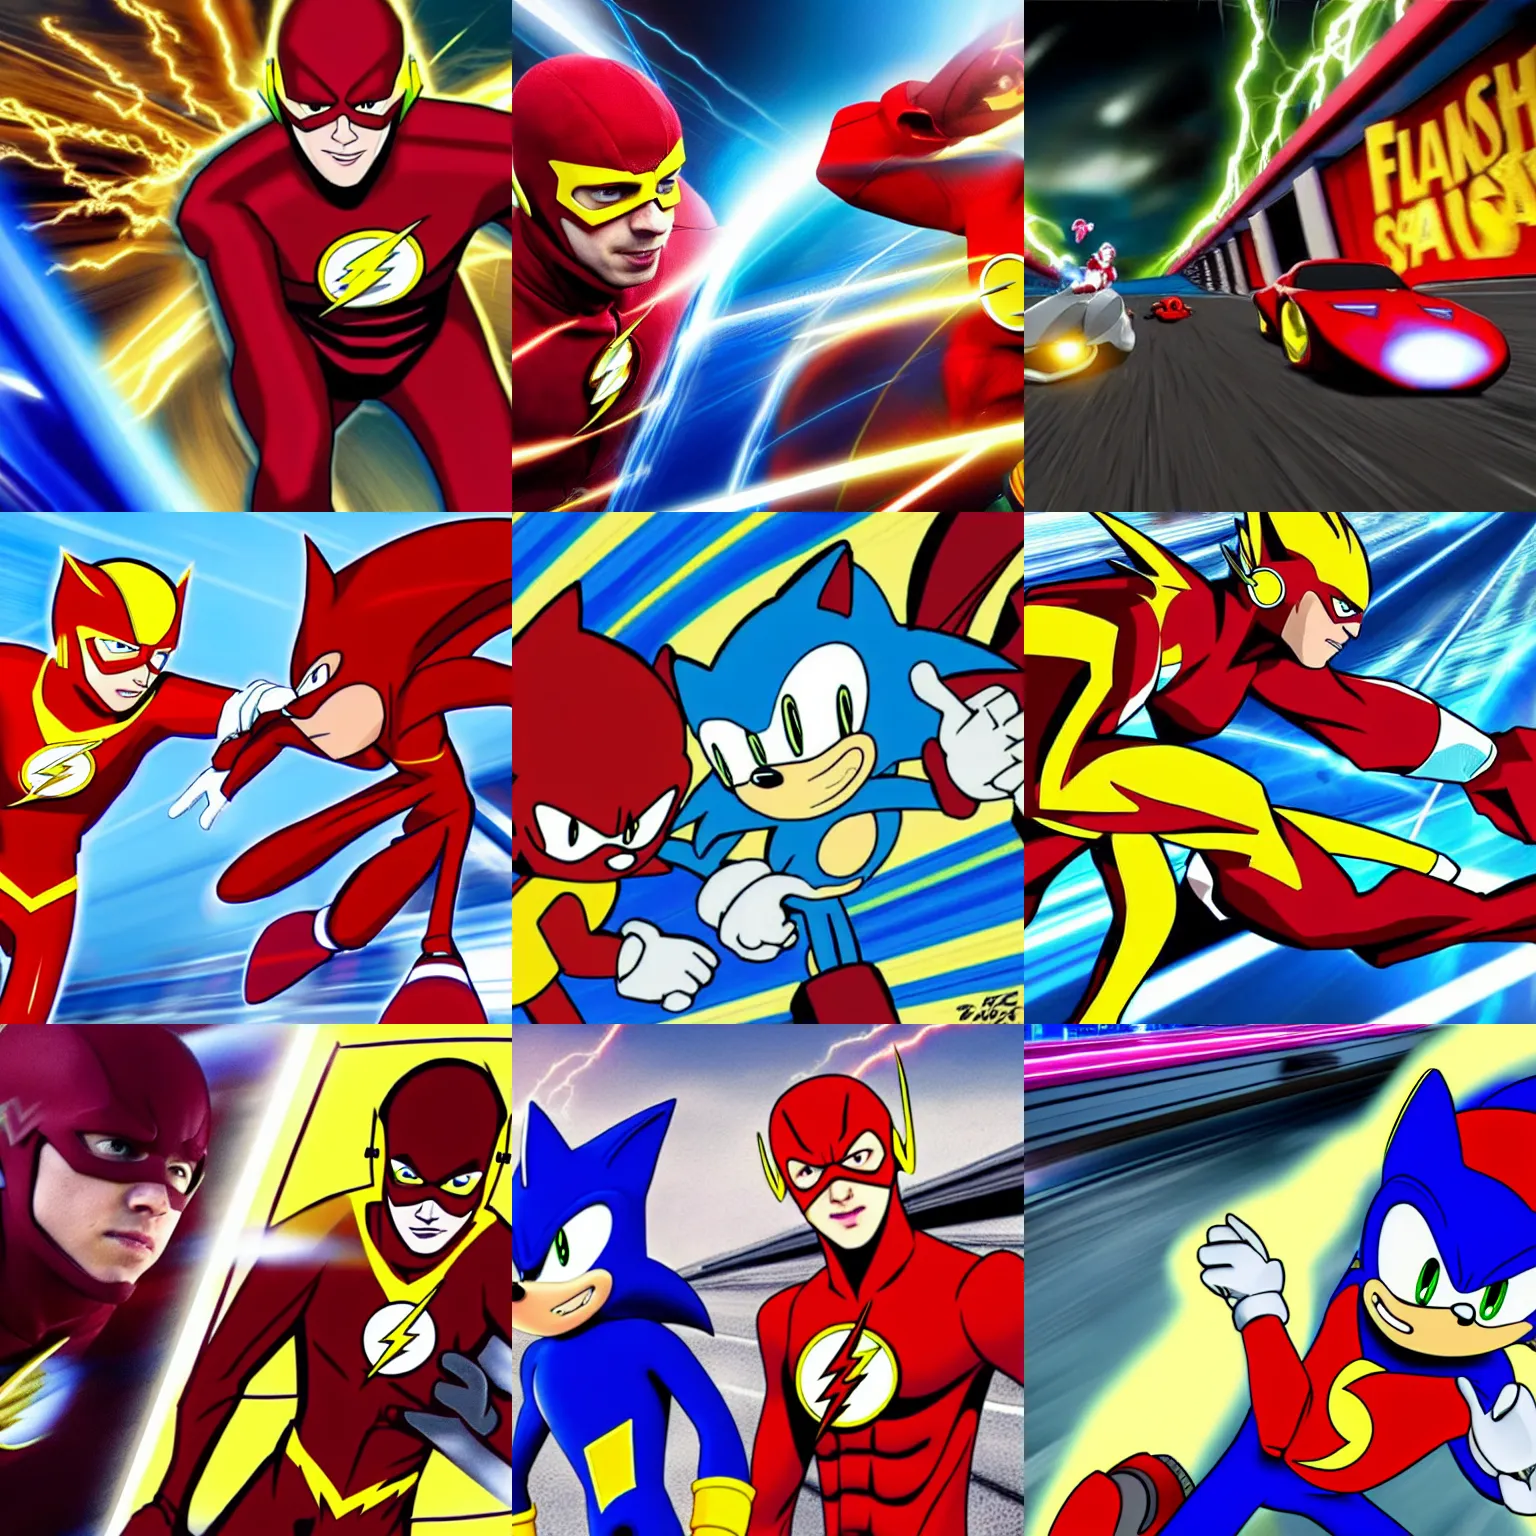 Prompt: The Flash meets Sonic the Hedgehog. Sonic racing against The Flash.